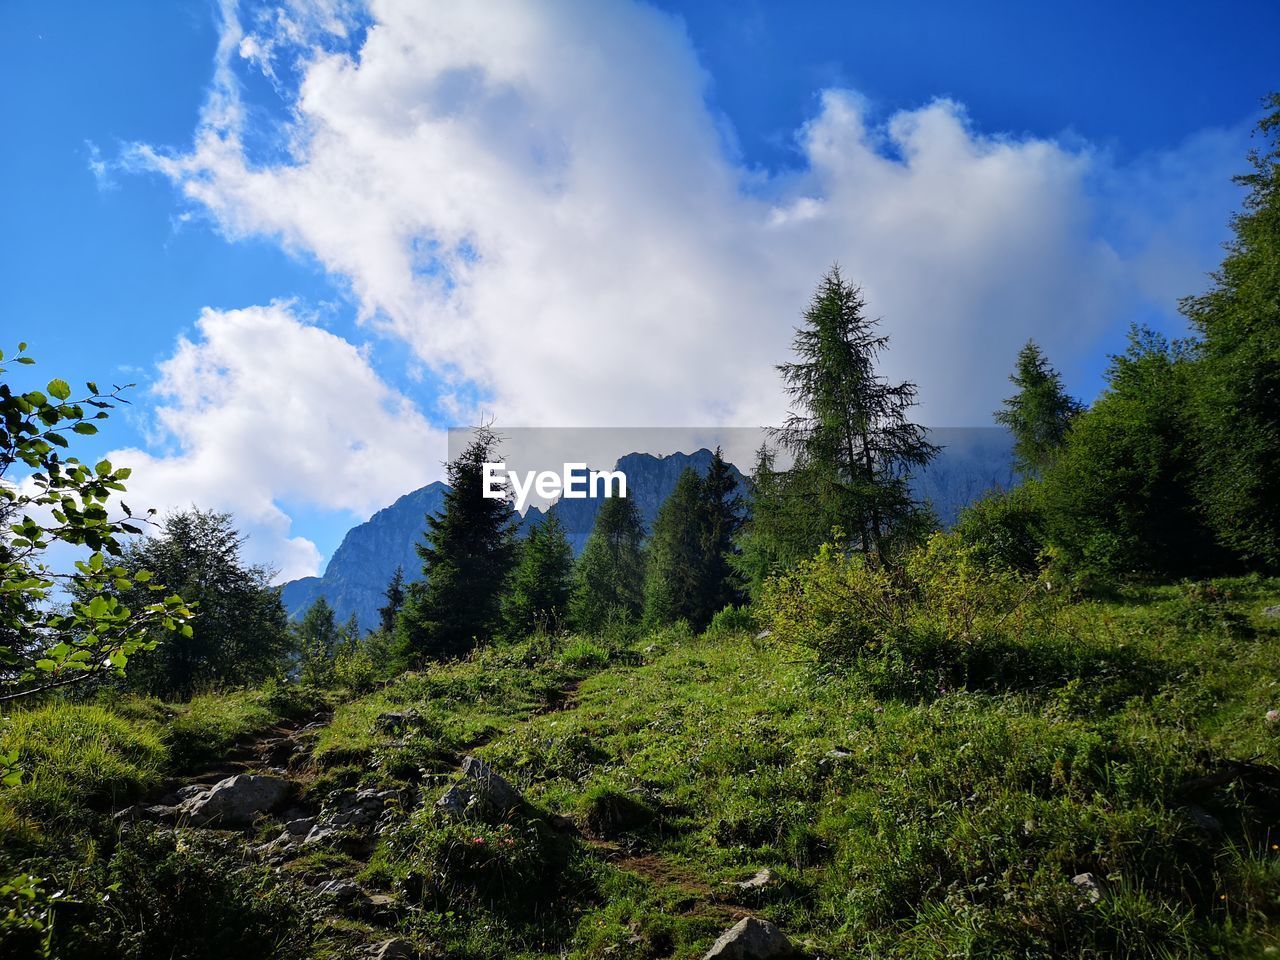 PANORAMIC VIEW OF TREES AND PLANTS GROWING ON MOUNTAIN